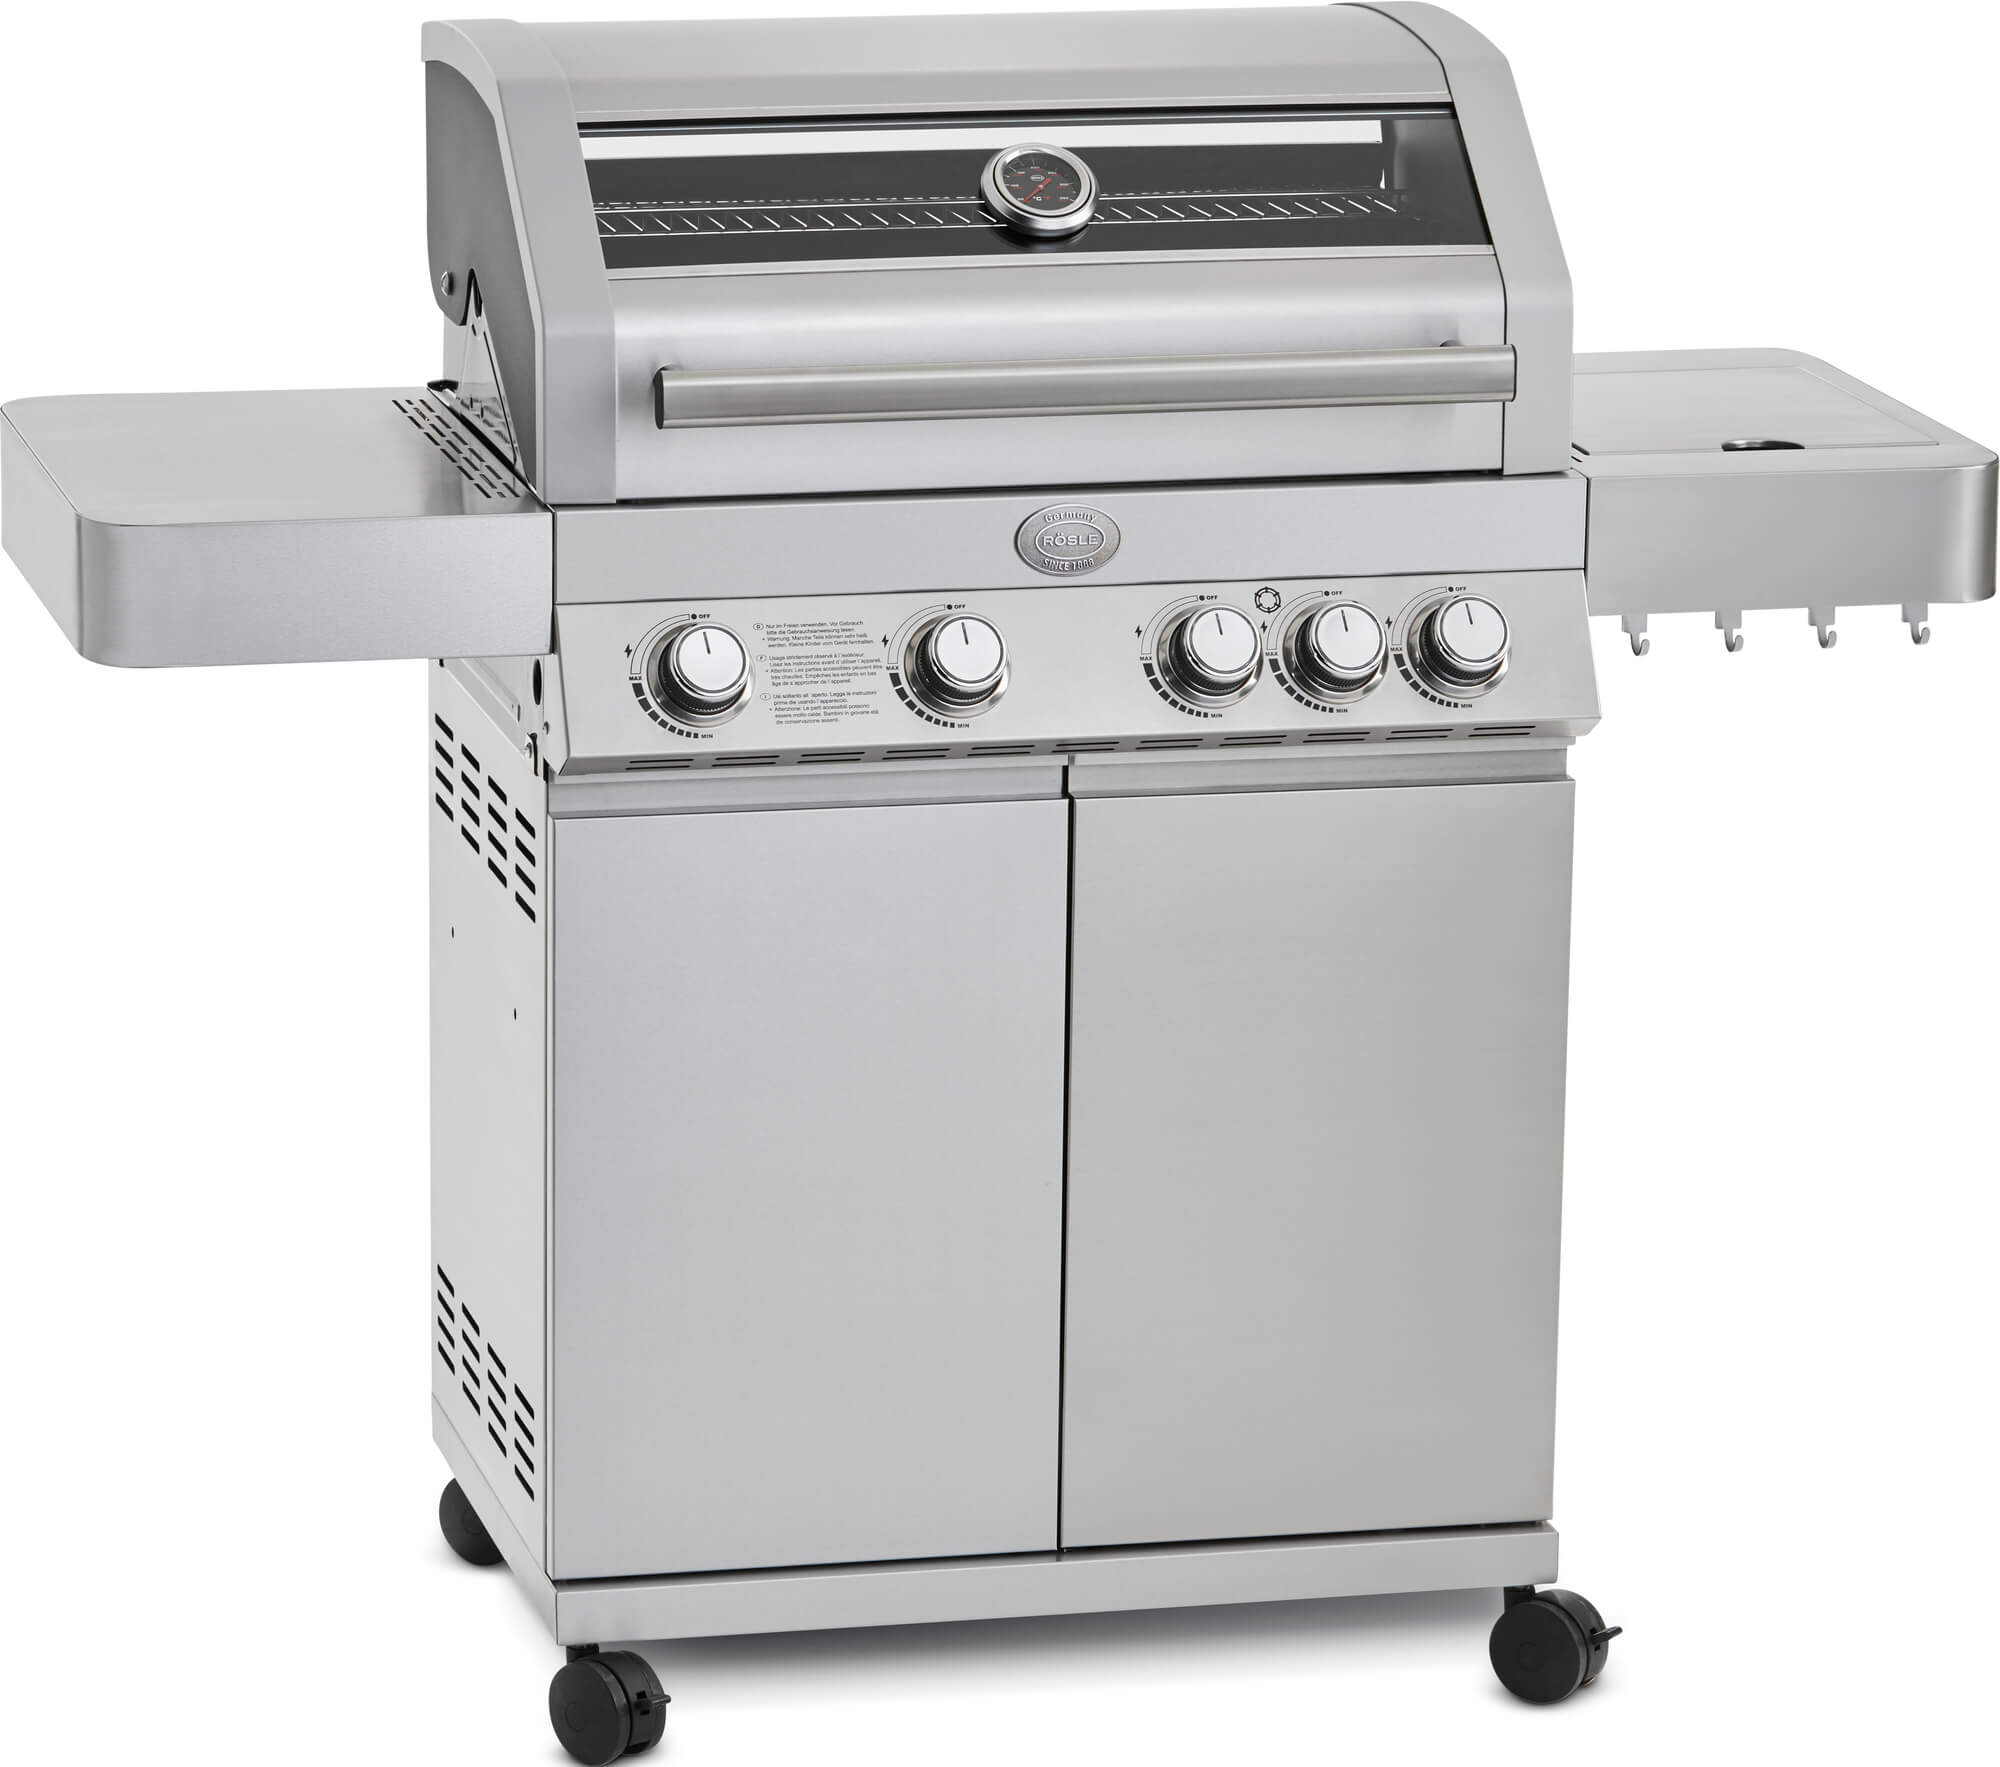 BBQ station Videro G4 stainless steel 50mbar